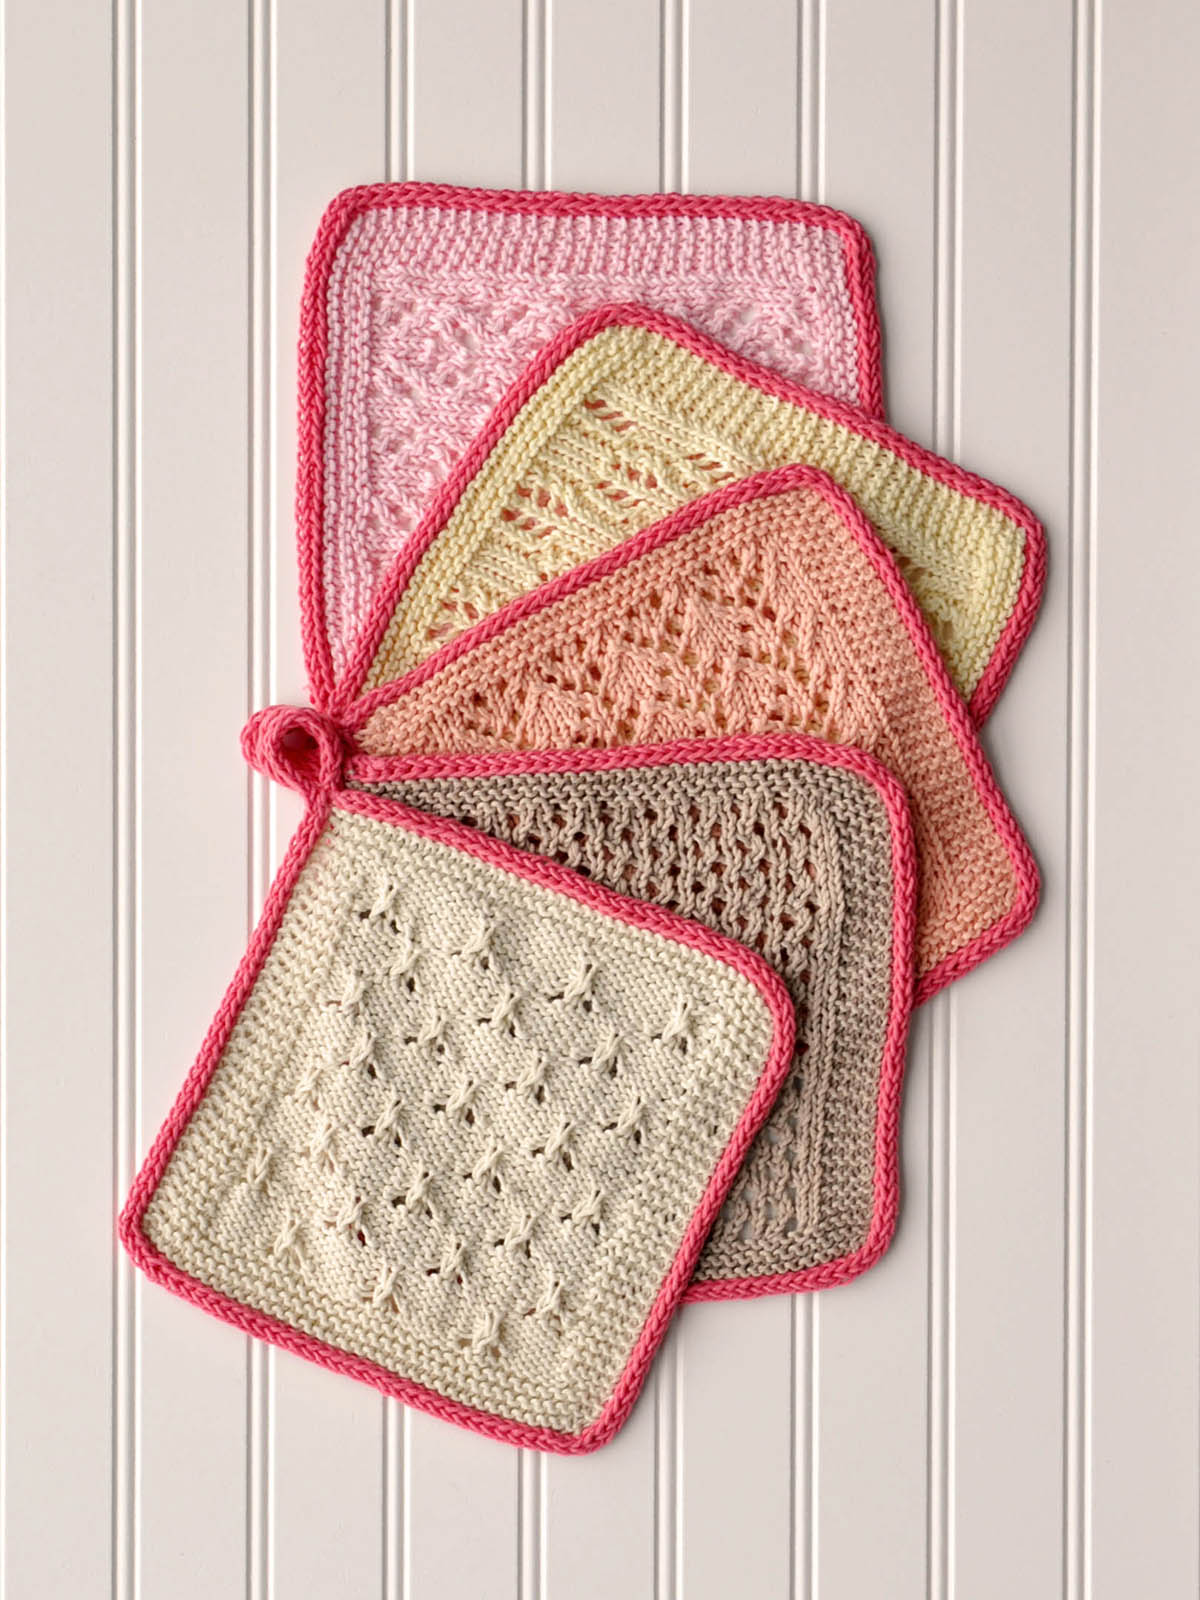 Ravelry: Hanging Dish Towel pattern by Little Luxury Knits